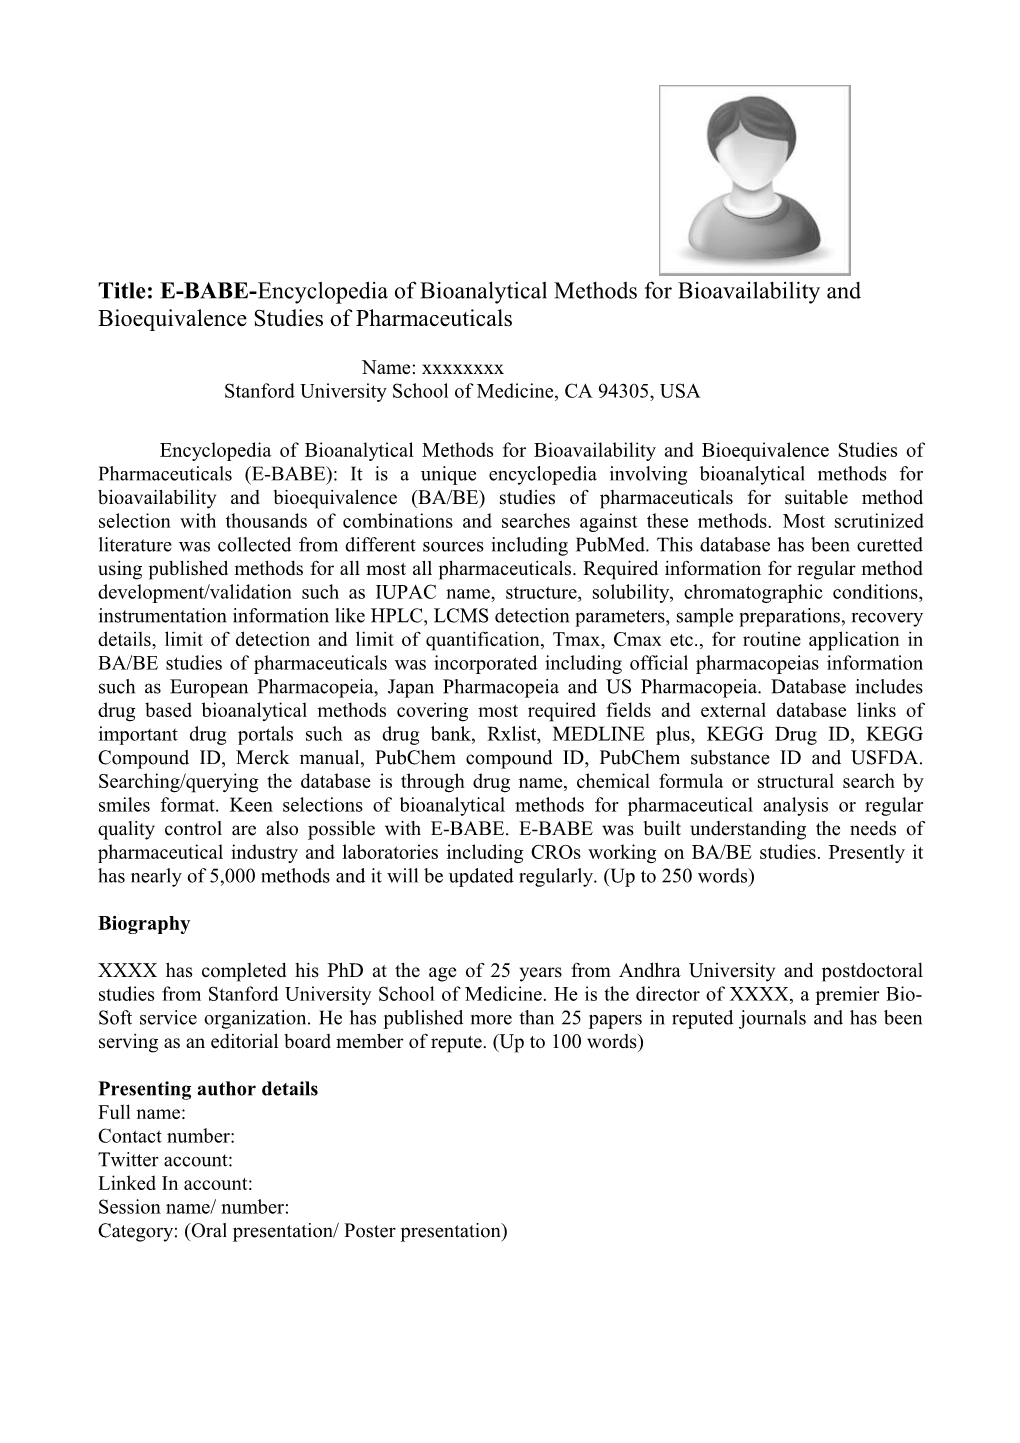 Title: E-BABE-Encyclopedia of Bioanalytical Methods for Bioavailability and Bioequivalence s1